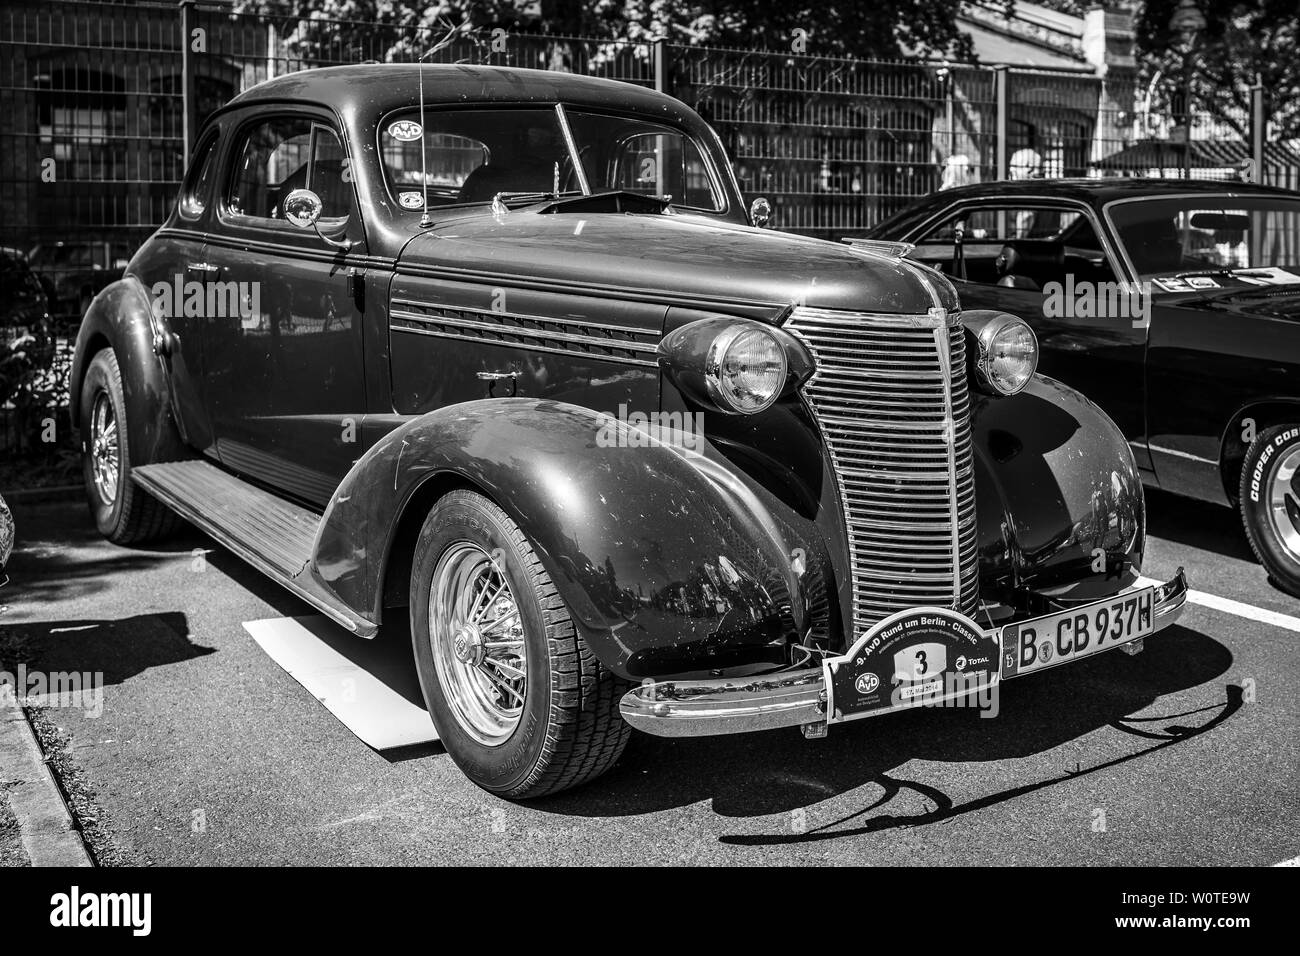 BERLIN - MAY 06, 2018: Vintage car Chevrolet Master Serie GB Business Coupe, 1937. Black and white. Oldtimertage Berlin-Brandenburg (31th Berlin-Brandenburg Oldtimer Day). Stock Photo